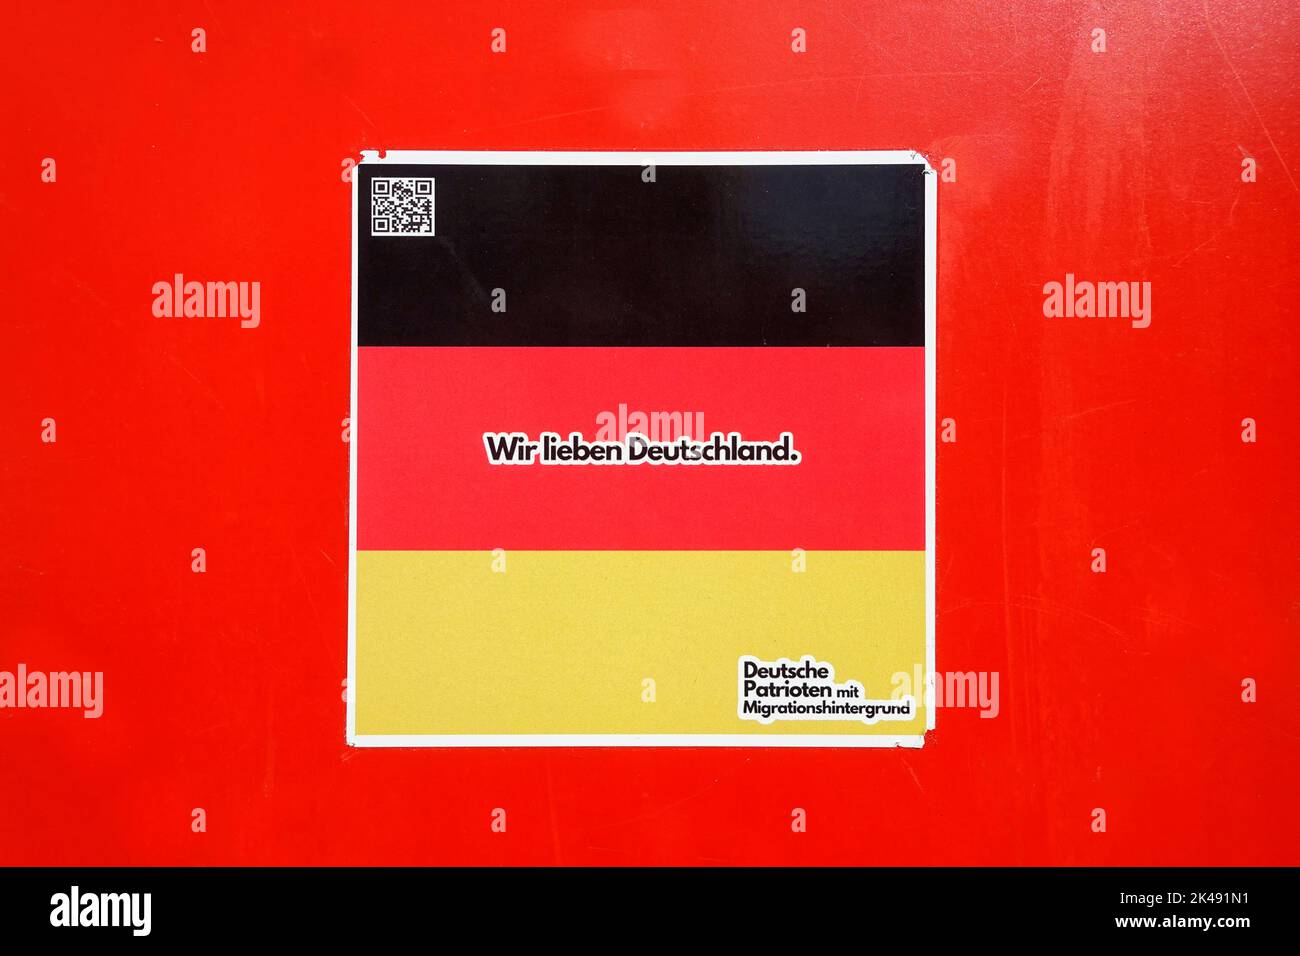 Sticker, we love Germany, German patriots with a migration background, Berlin, Germany Stock Photo